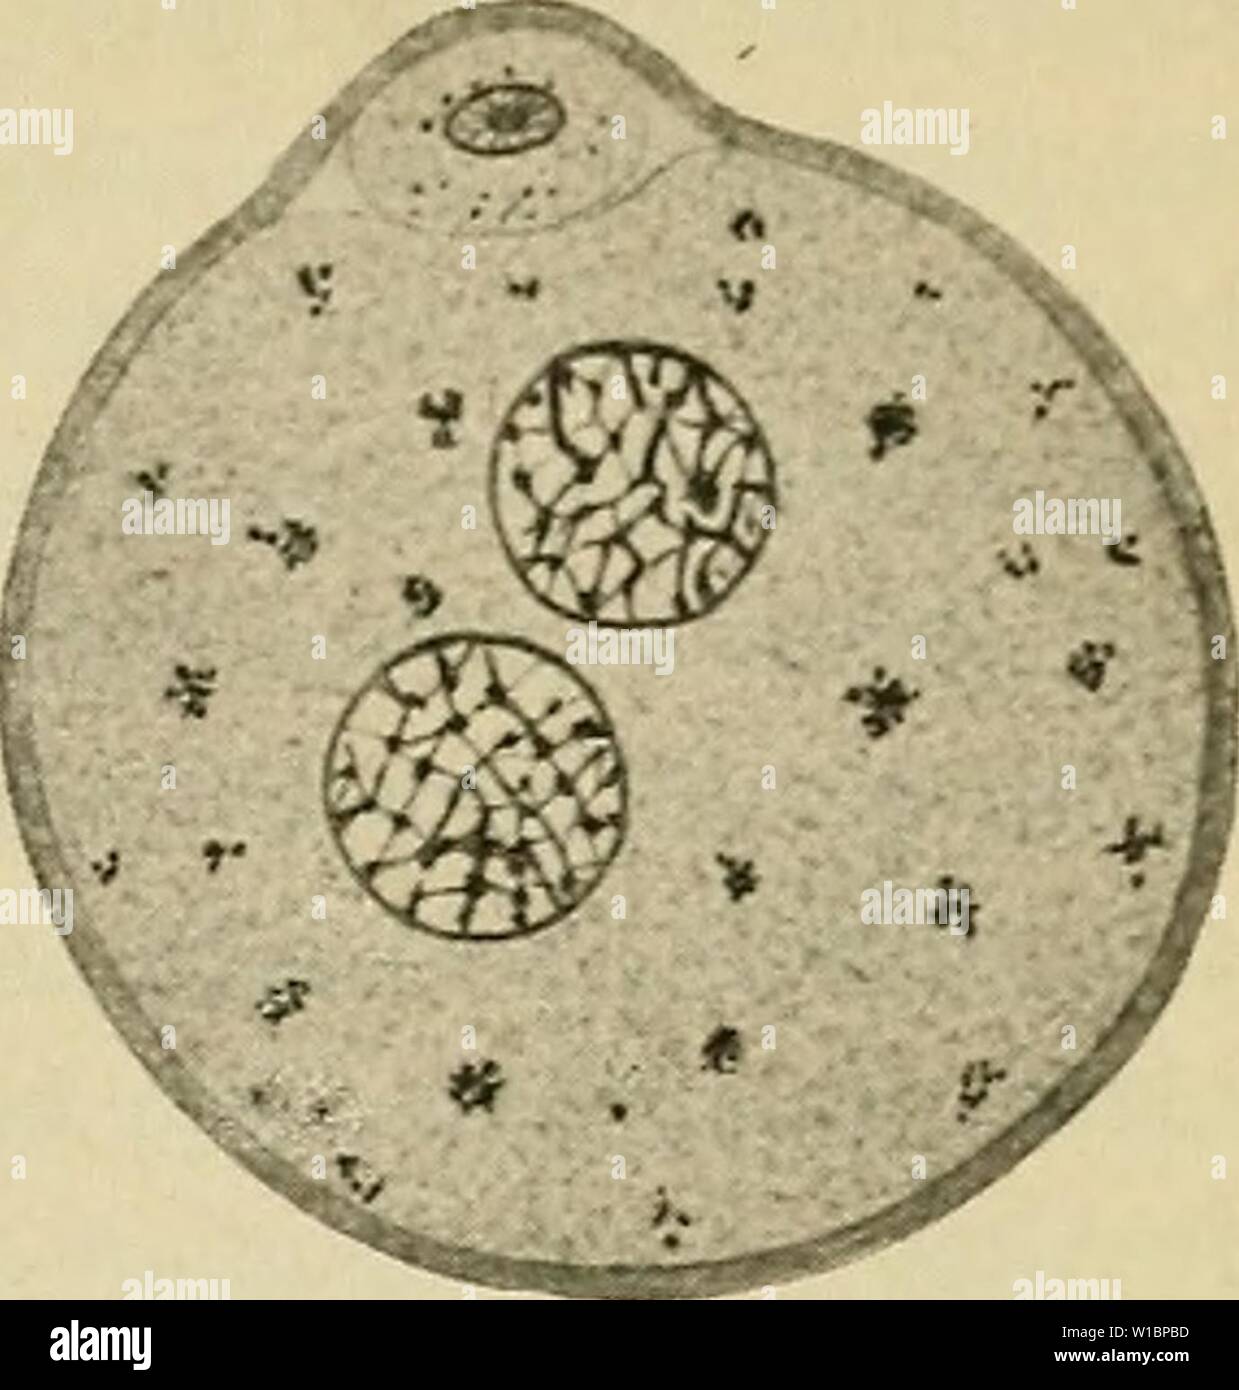 Archive image from page 44 of The development of the human. The development of the human body : a manual of human embryology . developmentofhum00mcmu Year: 1914  THE FERTILIZATION OF THE OVUM 33 ek Stock Photo